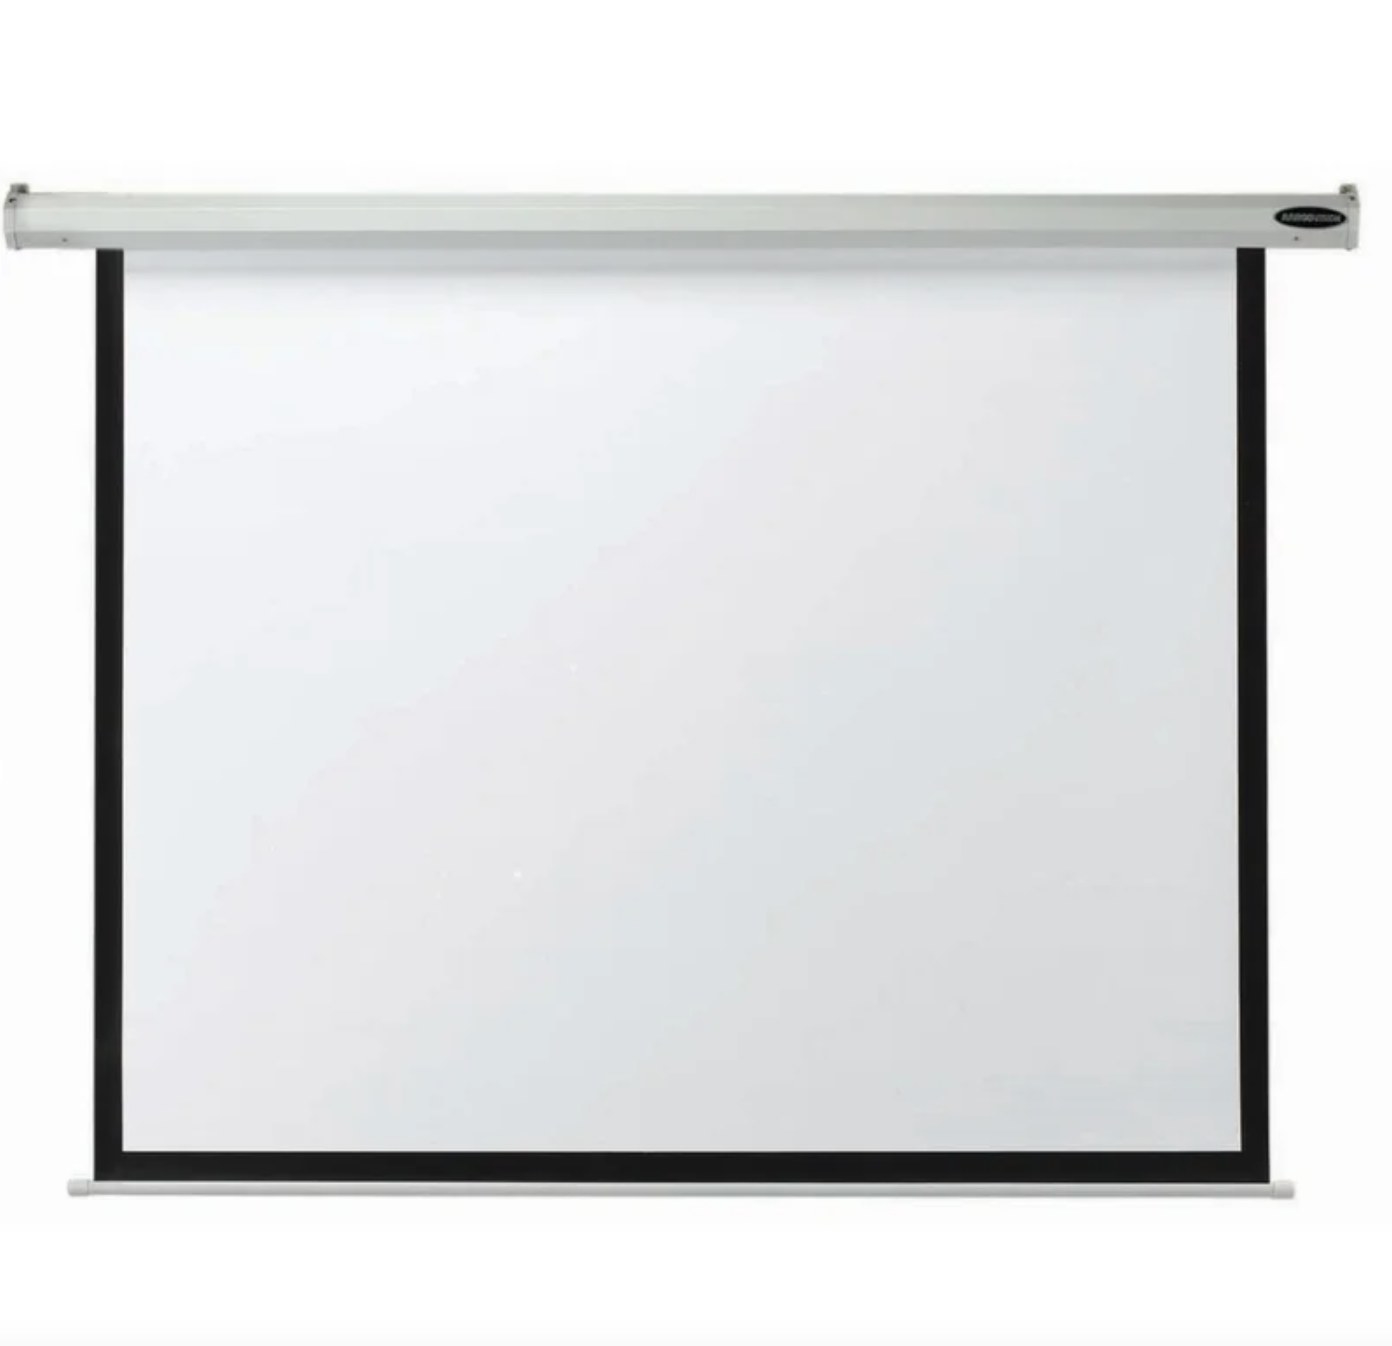 The projector screen